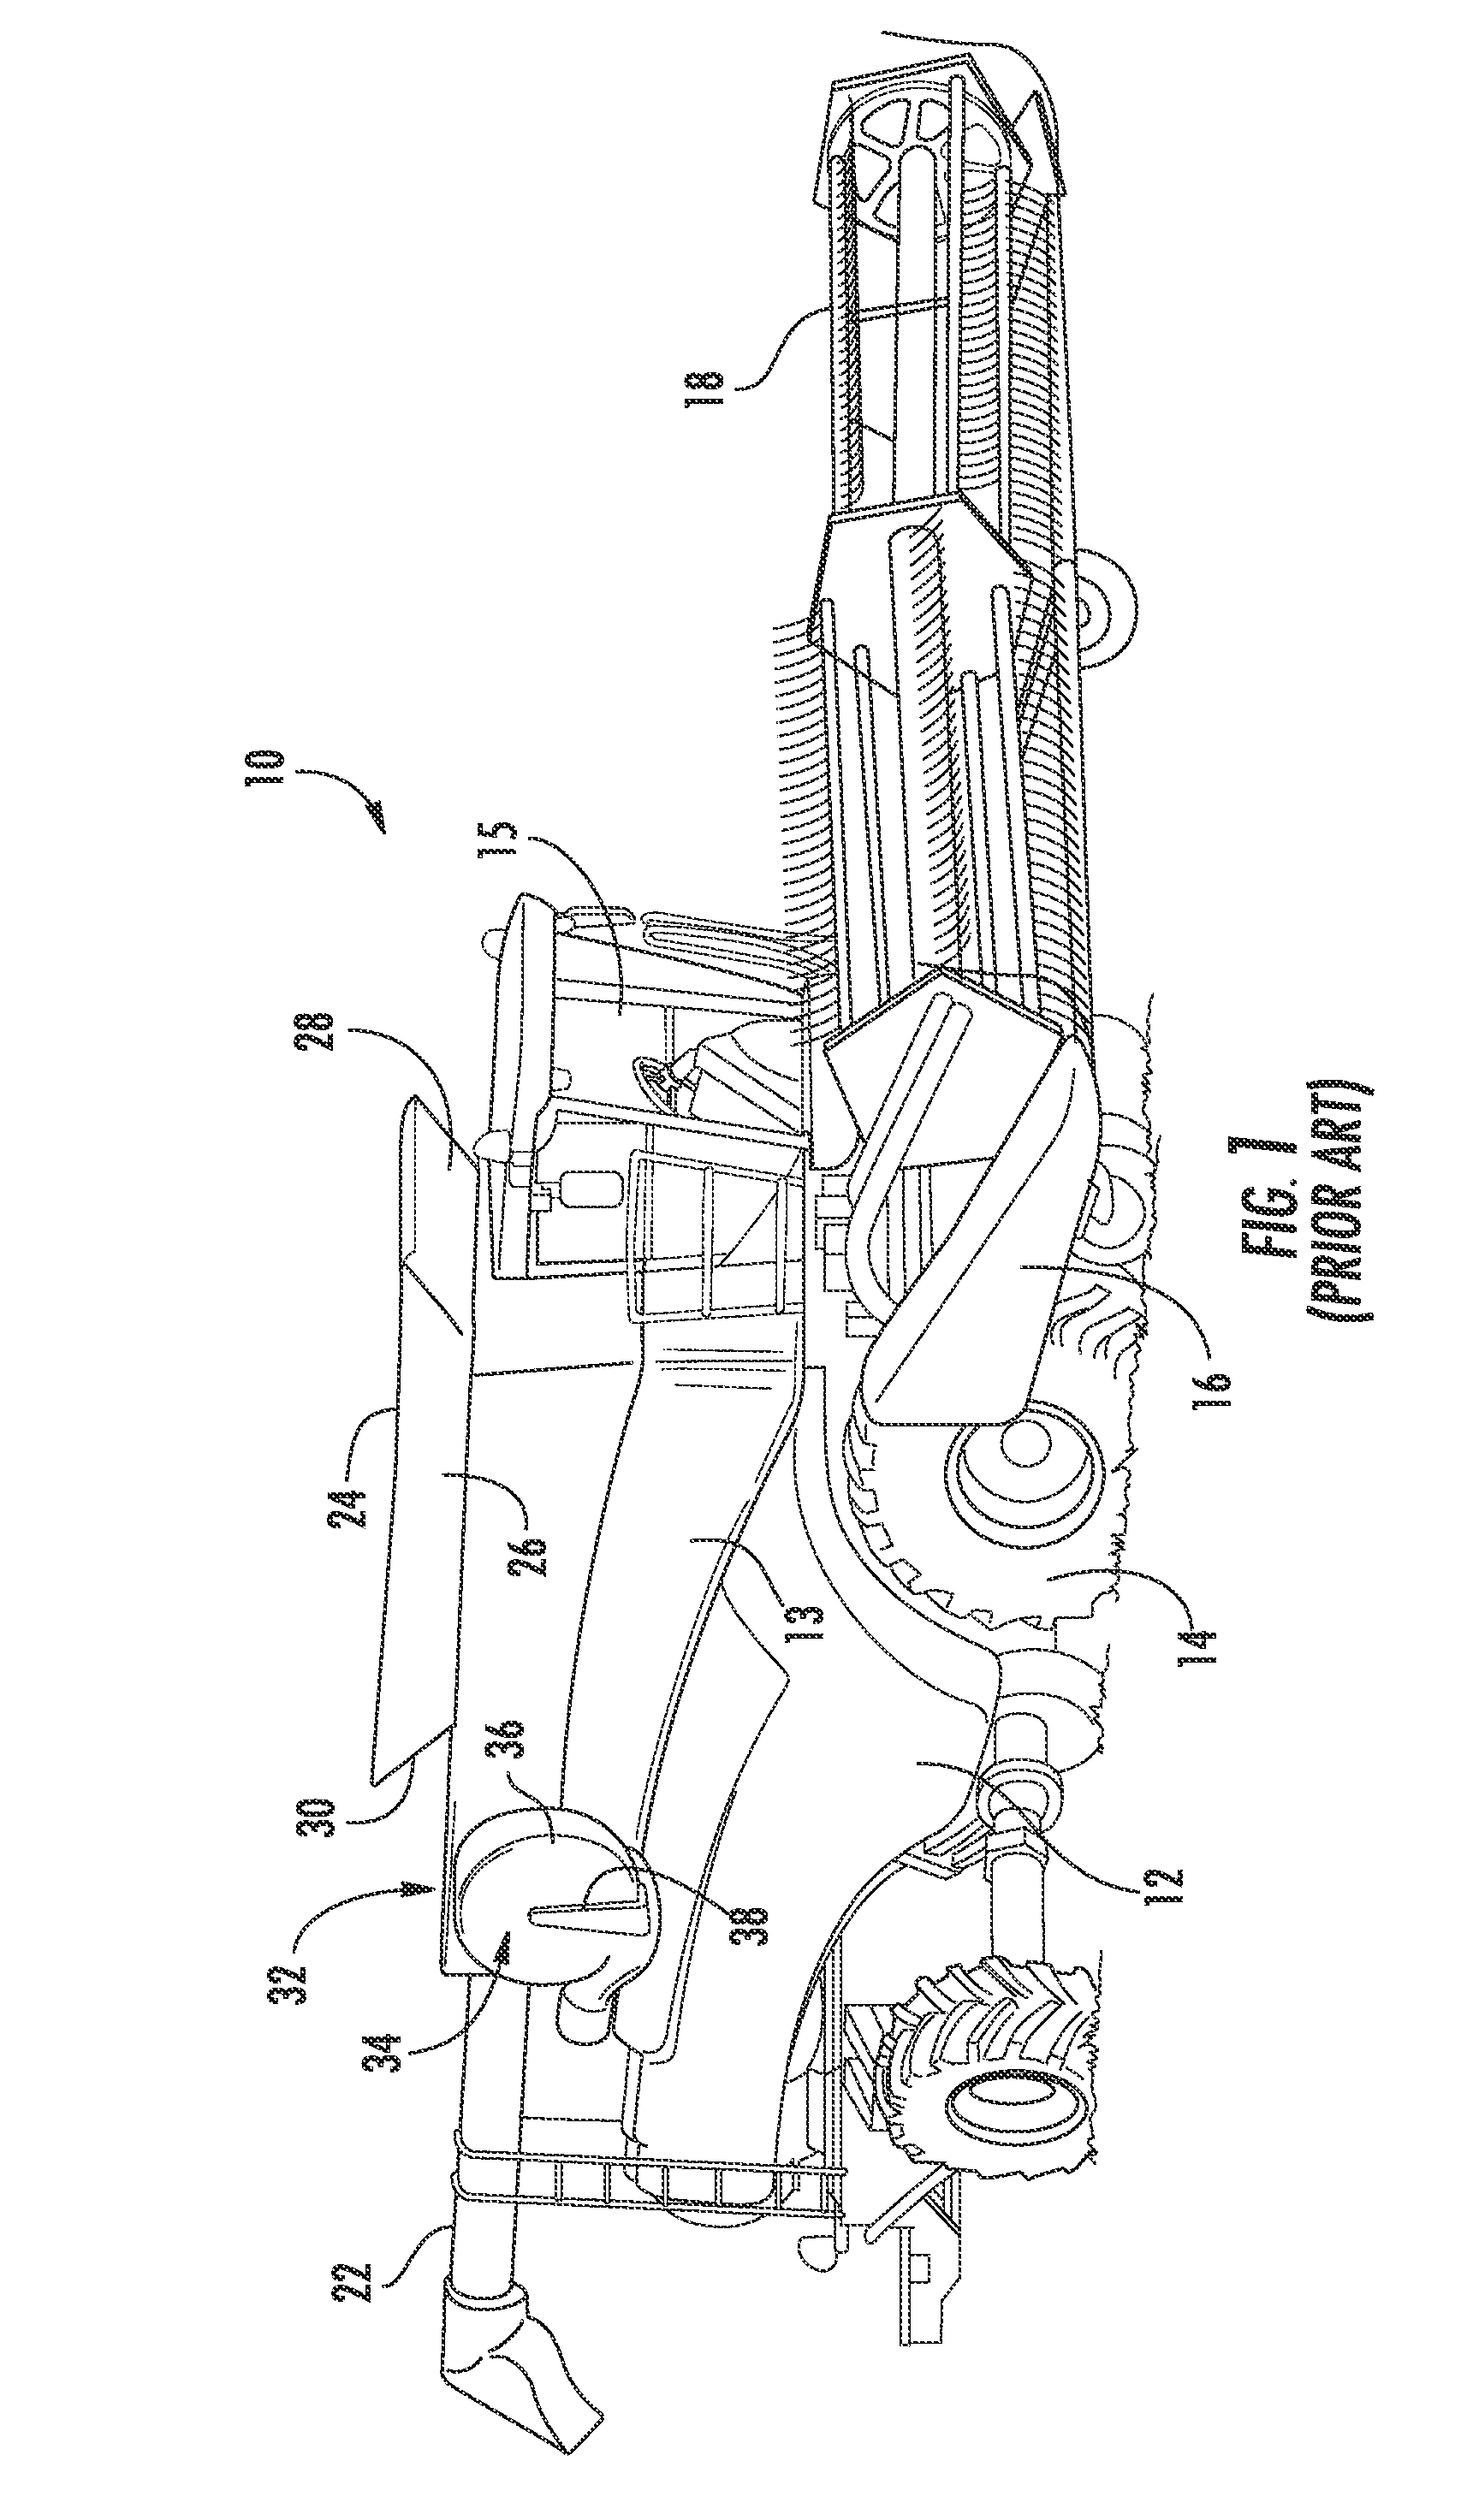 Air Intake Configuration for an Agricultural Harvesting Machine